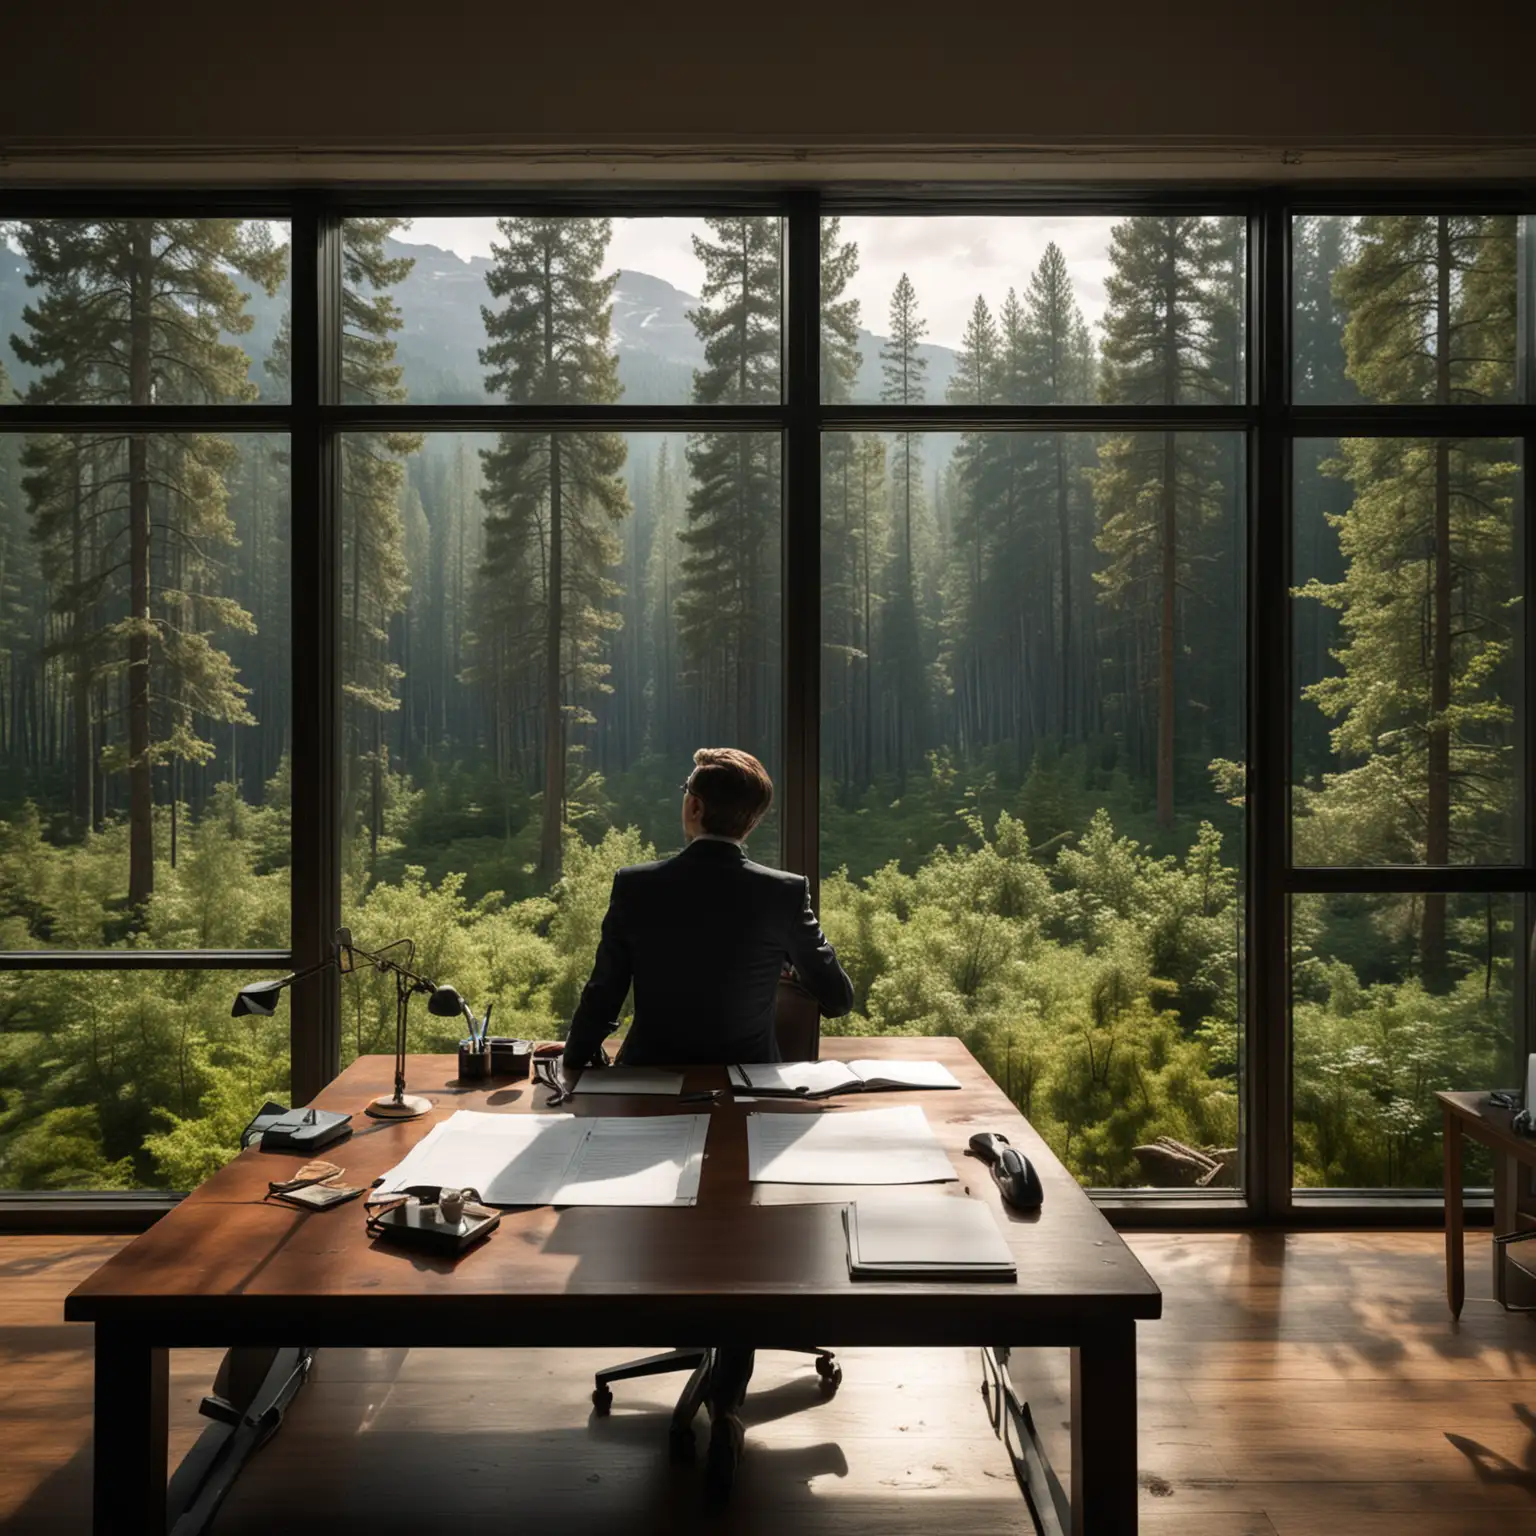 Physicist-Contemplating-Nature-in-Study-Overlooking-Forest